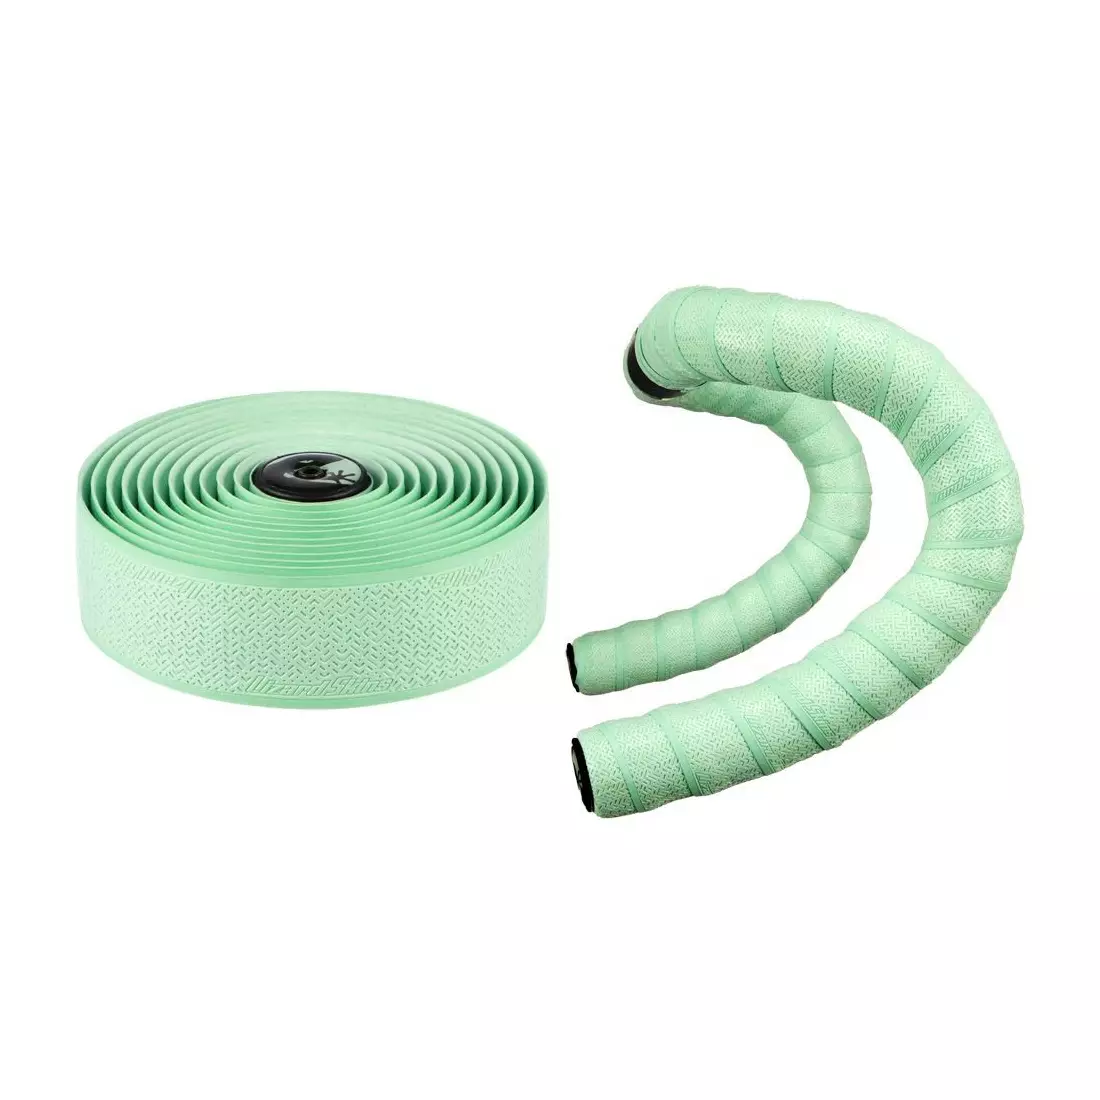 LIZARDSKINS bicycle handlebar wrap dsp 3.2 bar tape 3,2mm mint green LZS-DSPCY376